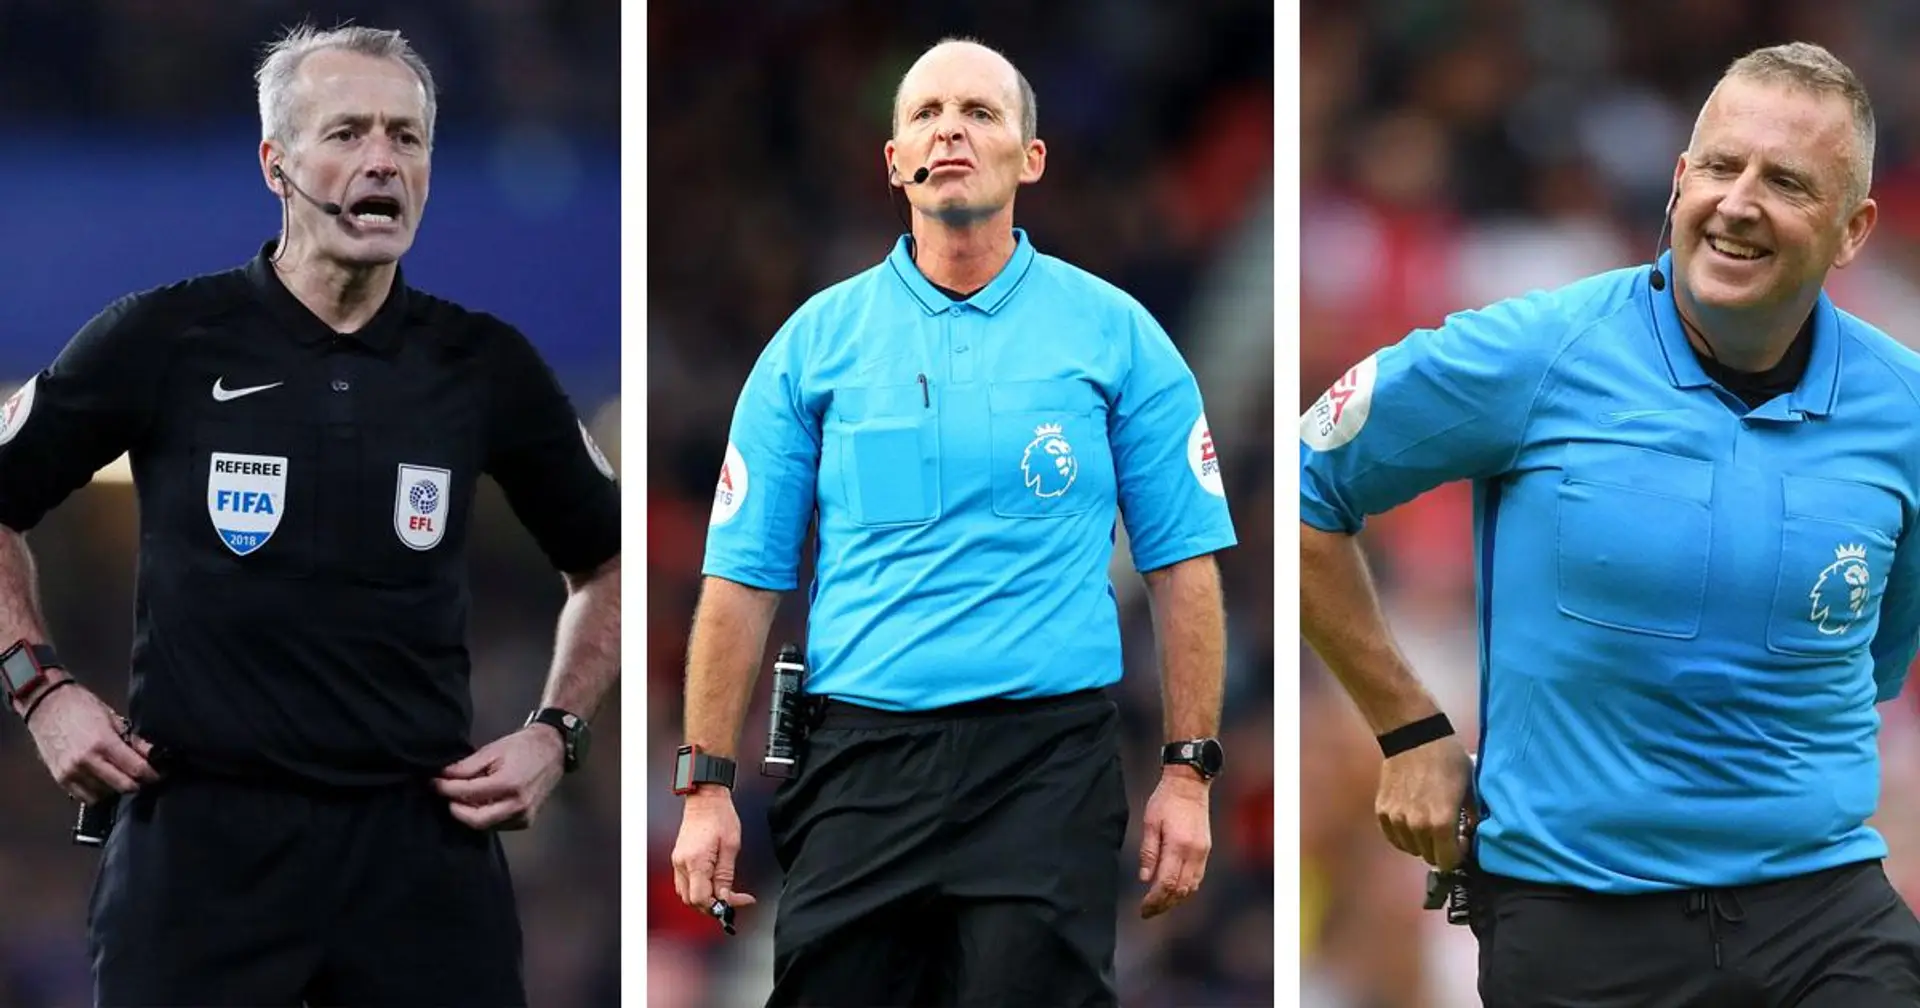 3 Premier League referees that many fans want to retire now